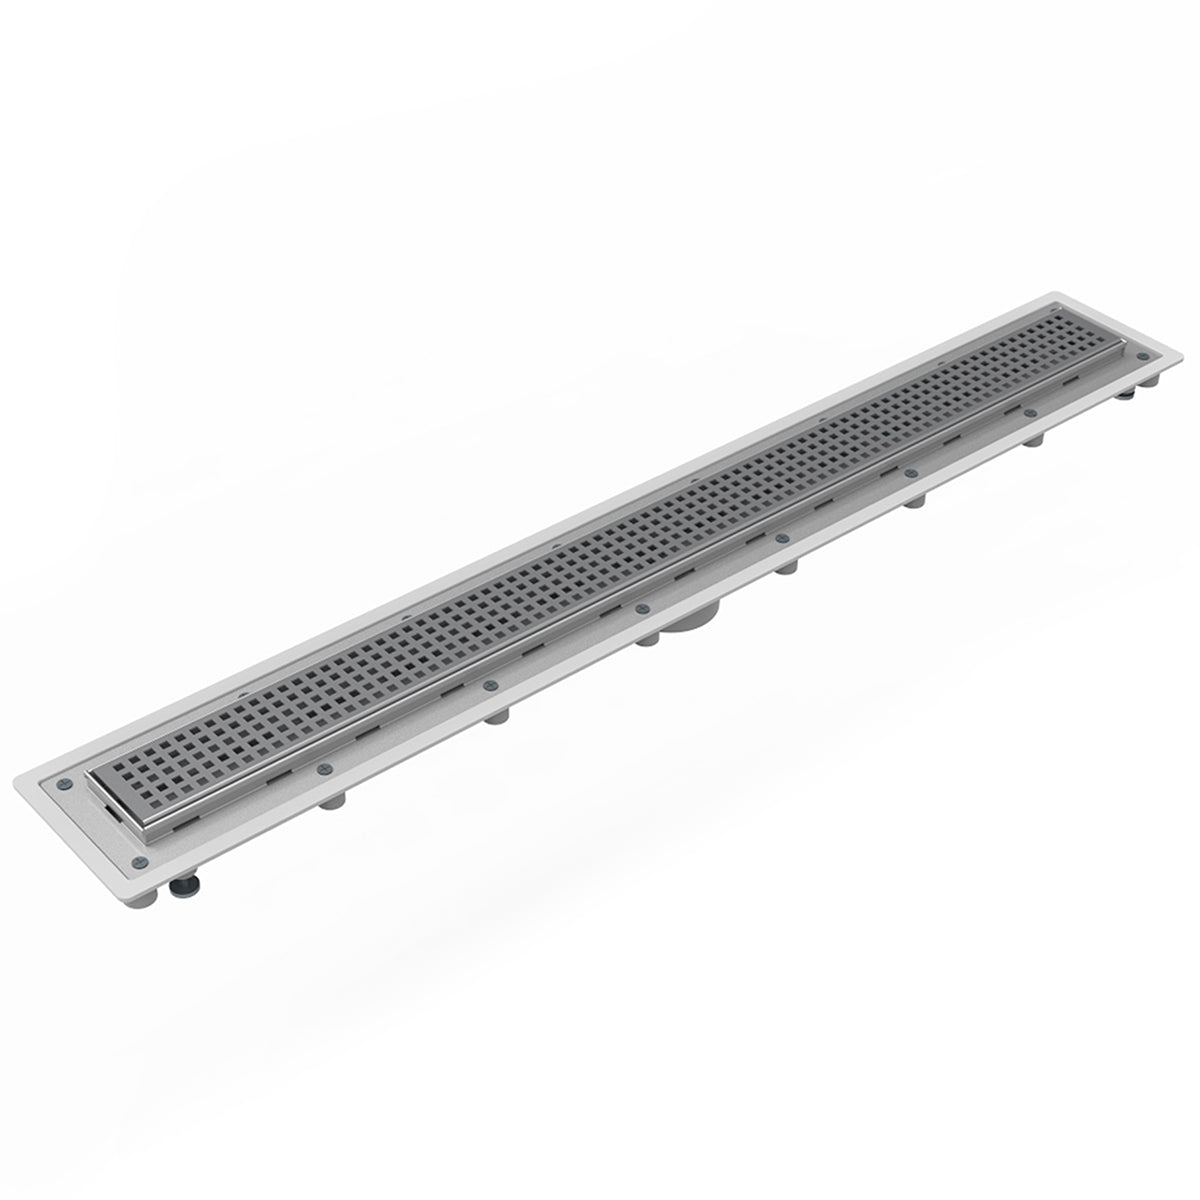 Infinity Drain 60" Universal Infinity Linear Drain Kit with PVC Channel and Squares Pattern Grate